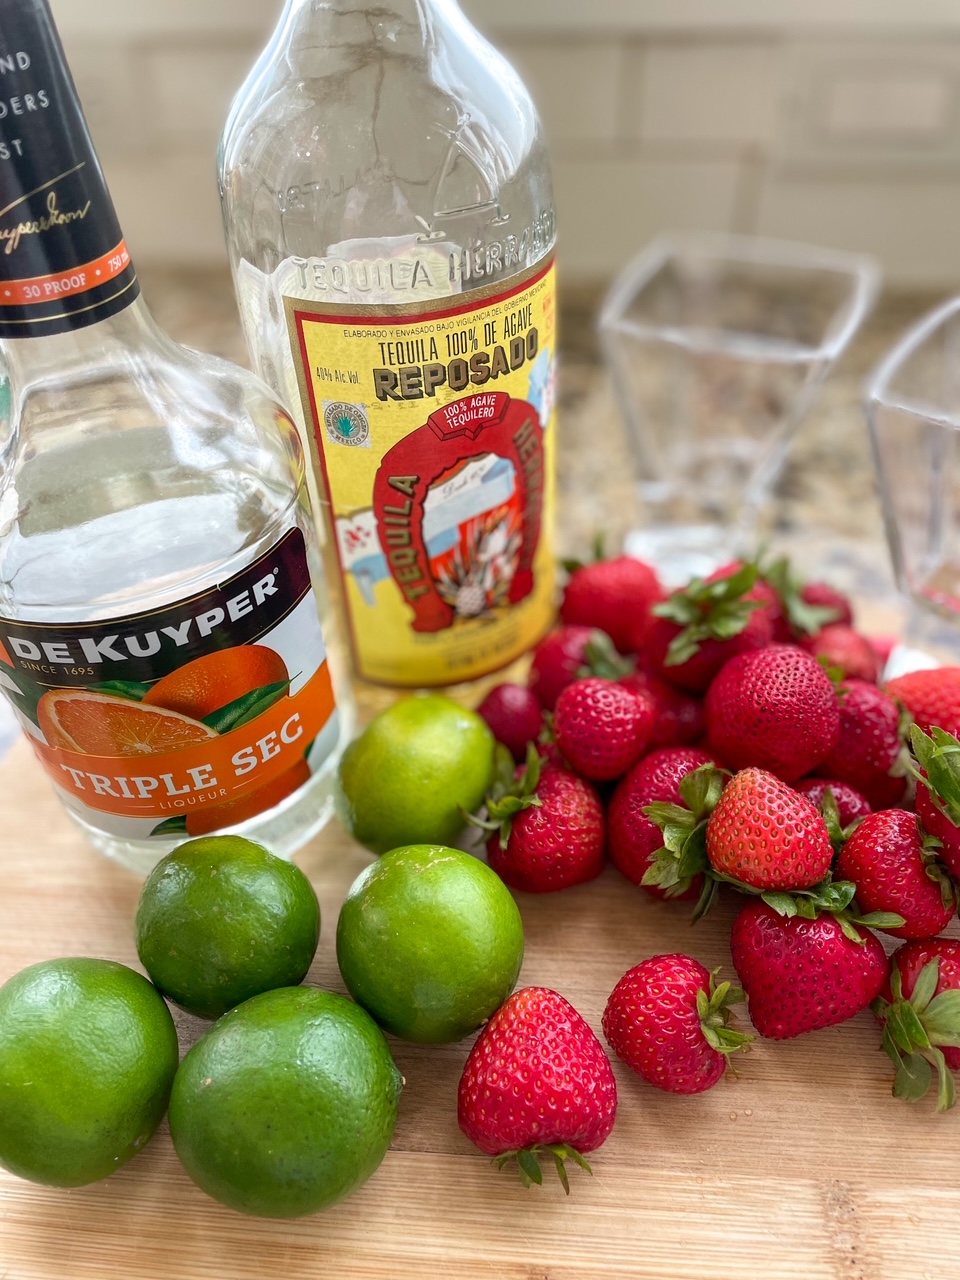 The ingredients for the Fresh Strawberry Margaritas - tequila, triple sec, limes, strawberries and simple sugar